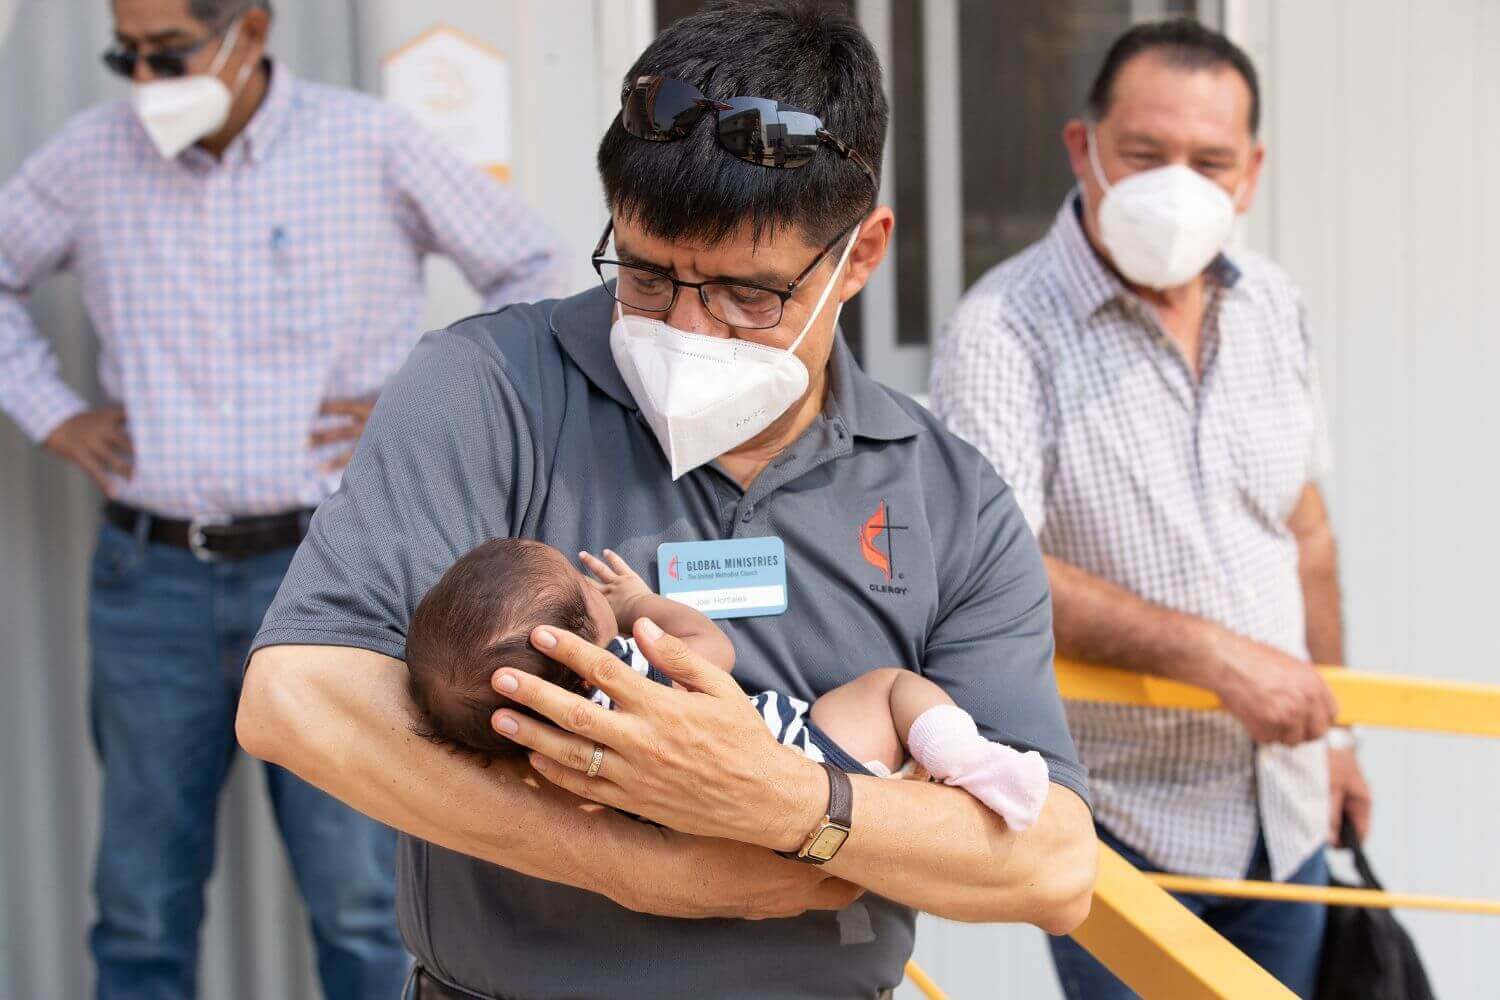 The Rev. Joel Hortiales cradles 11-day-old Dina at the Hospitalidad y Solidaridad migrant shelter in Mexico. Photo by Mike DuBose